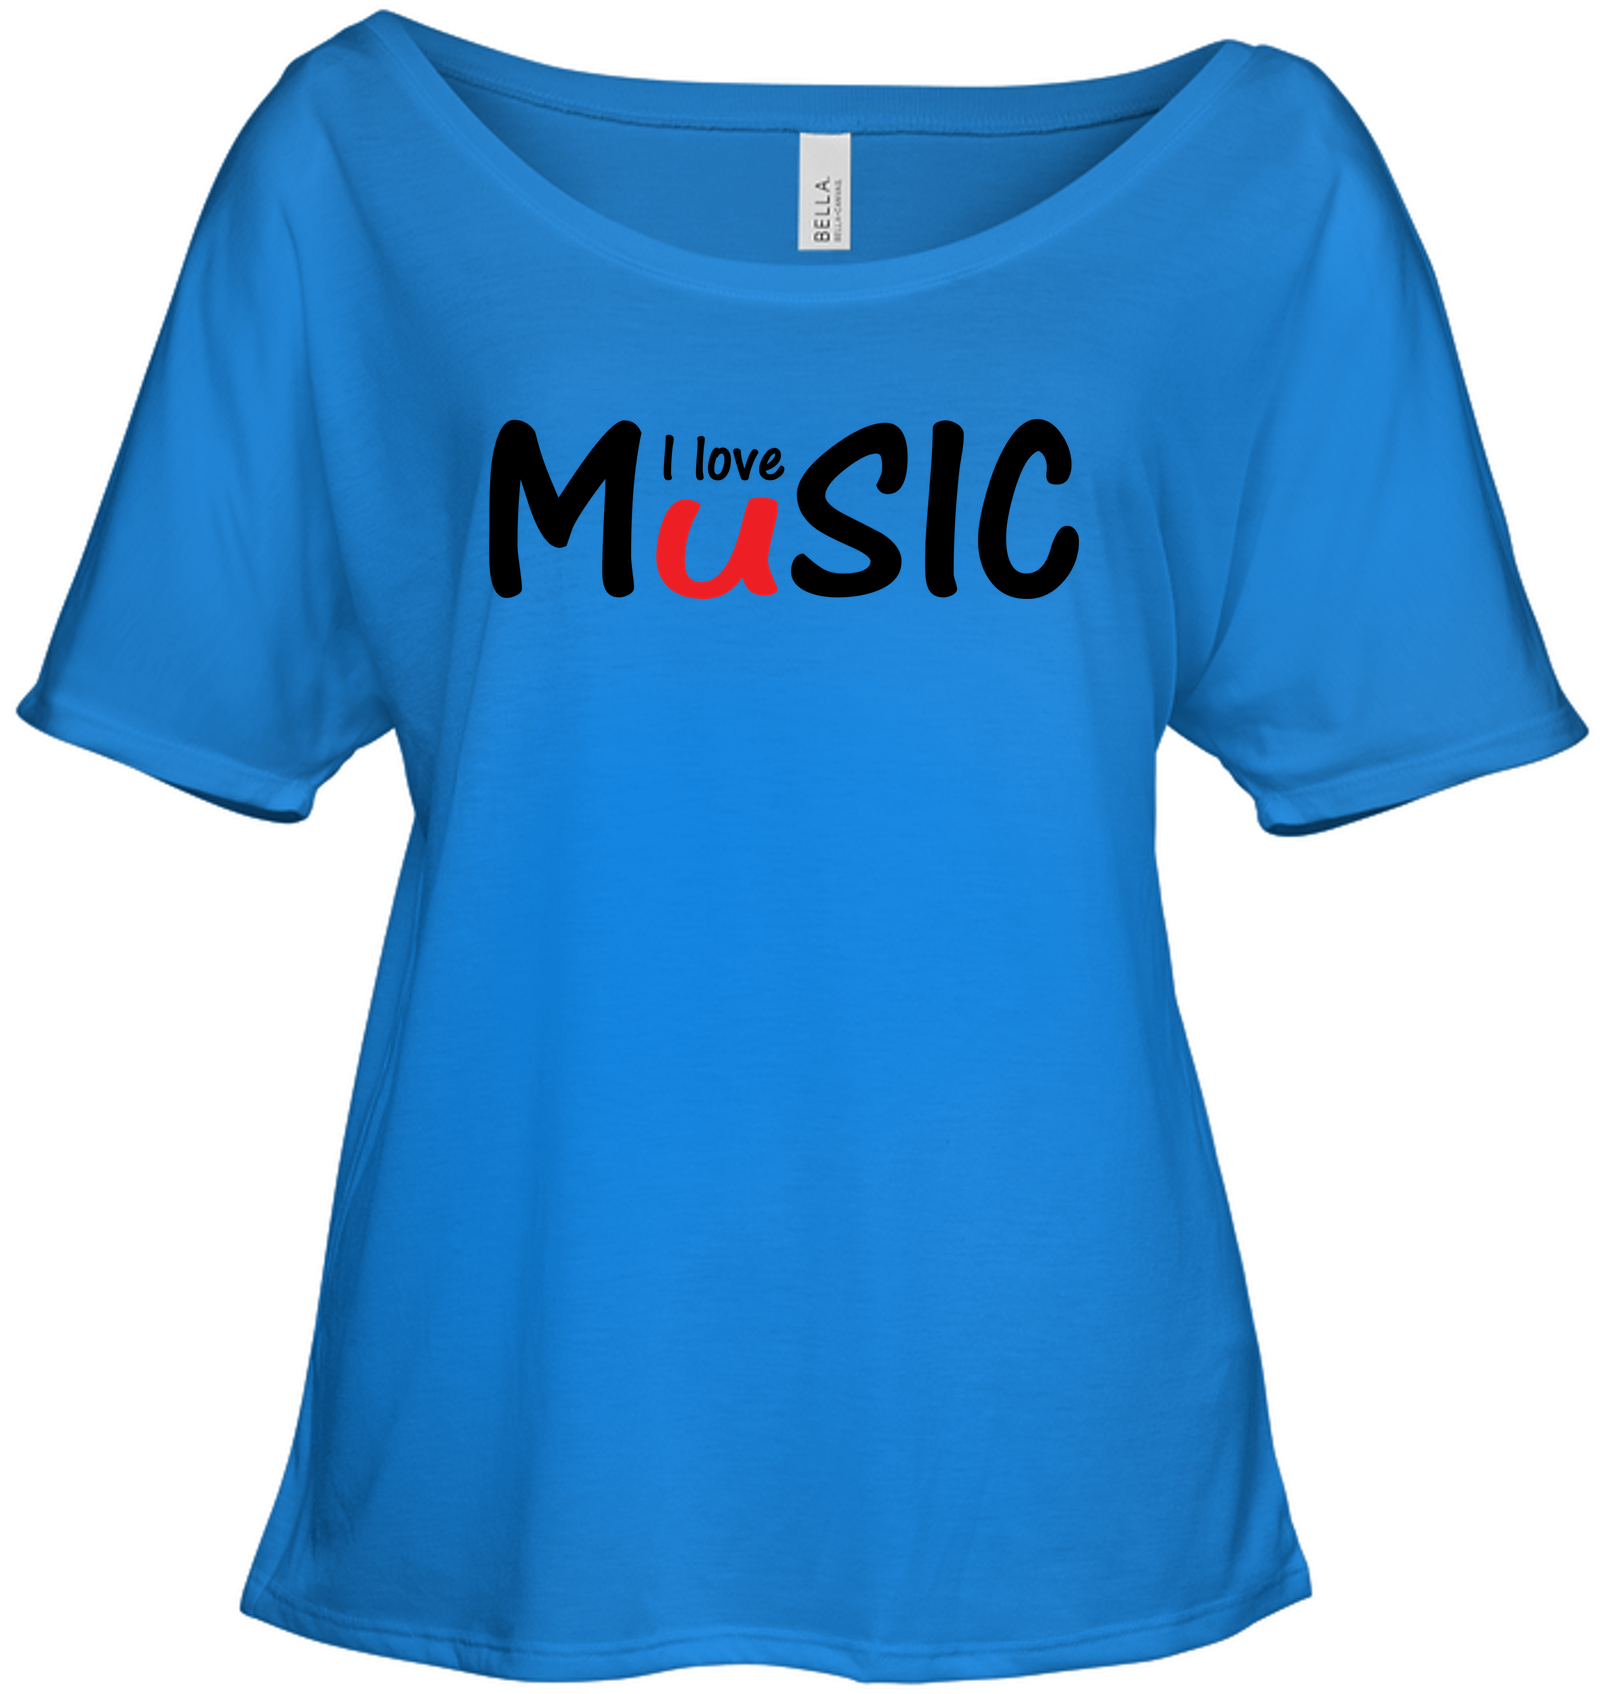 I Love Music plain and simple - Bella + Canvas Women's Slouchy Tee